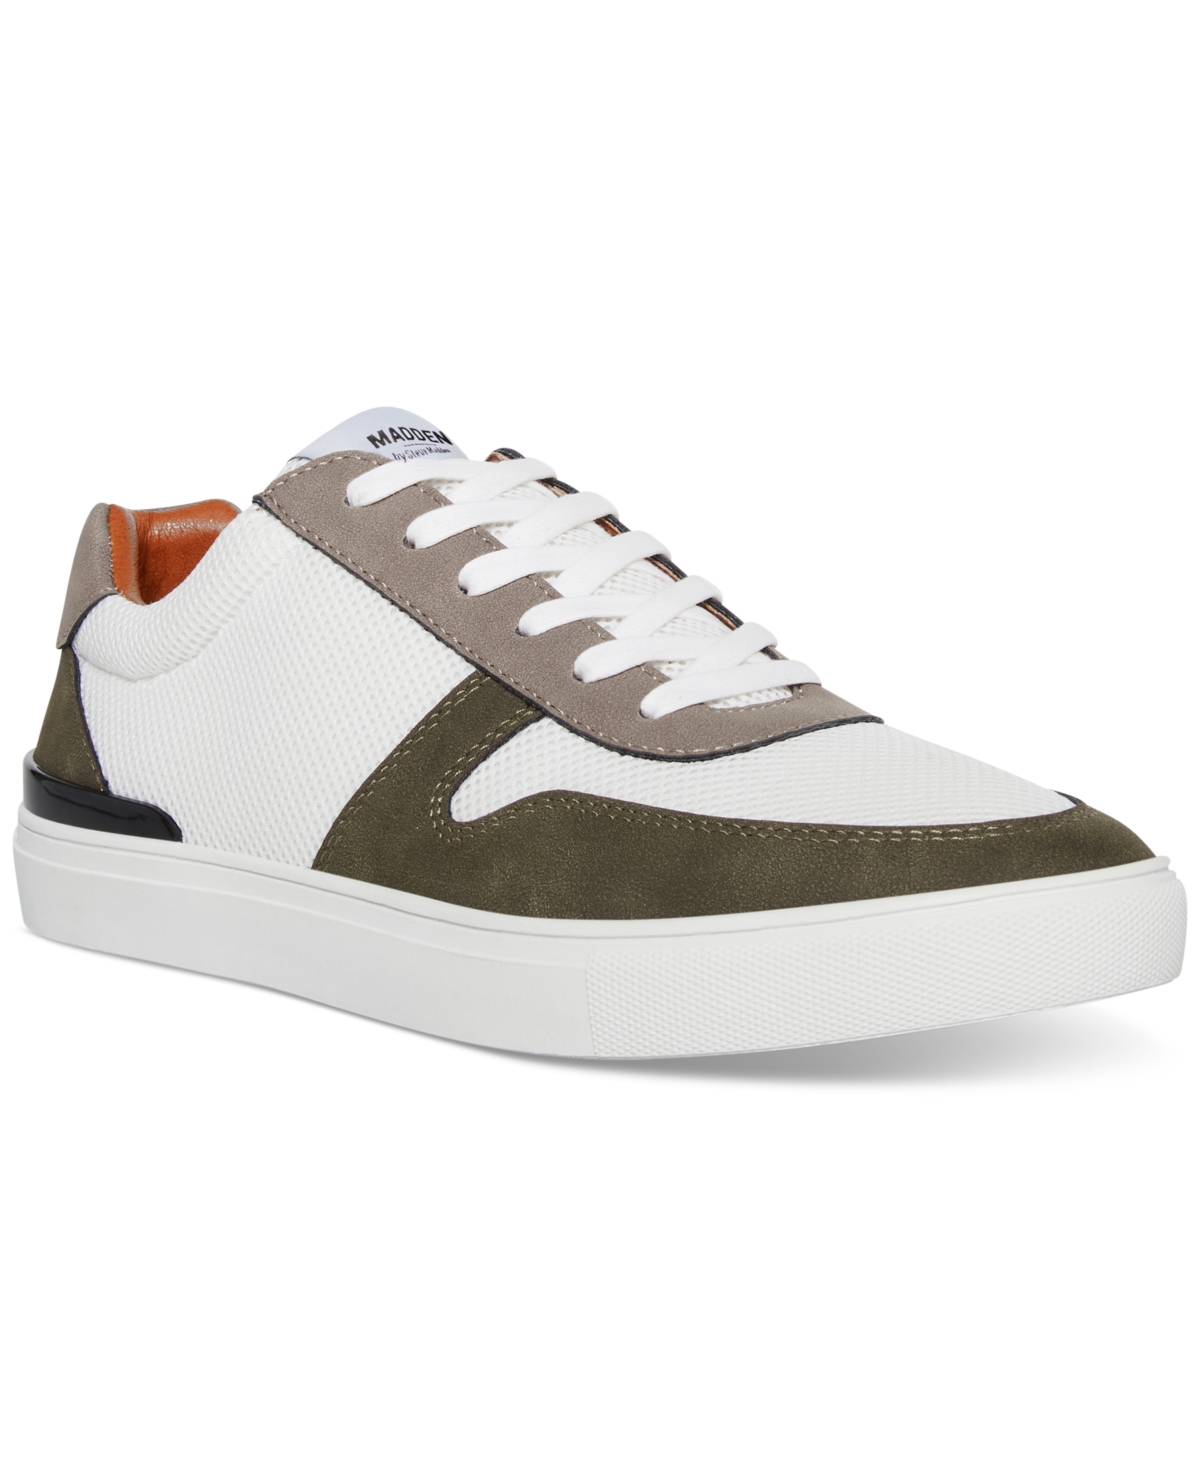 Men's Sollor Lace-Up Sneakers - Olive Suede